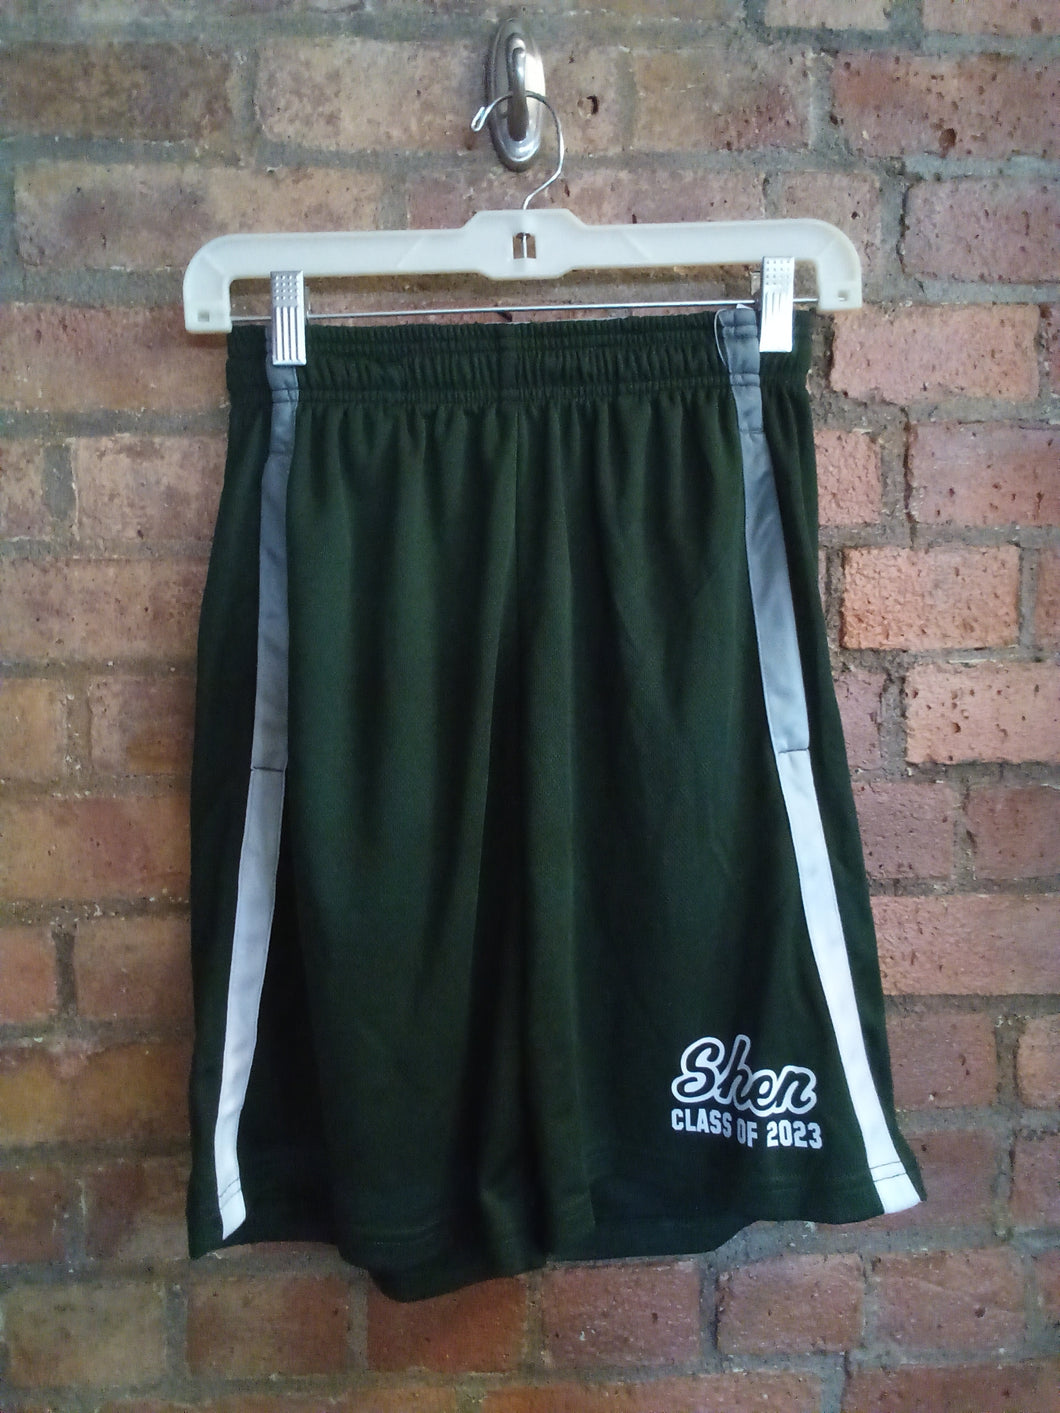 CLEARANCE - Shen Class of 2023 Green Gym Short - Size Small